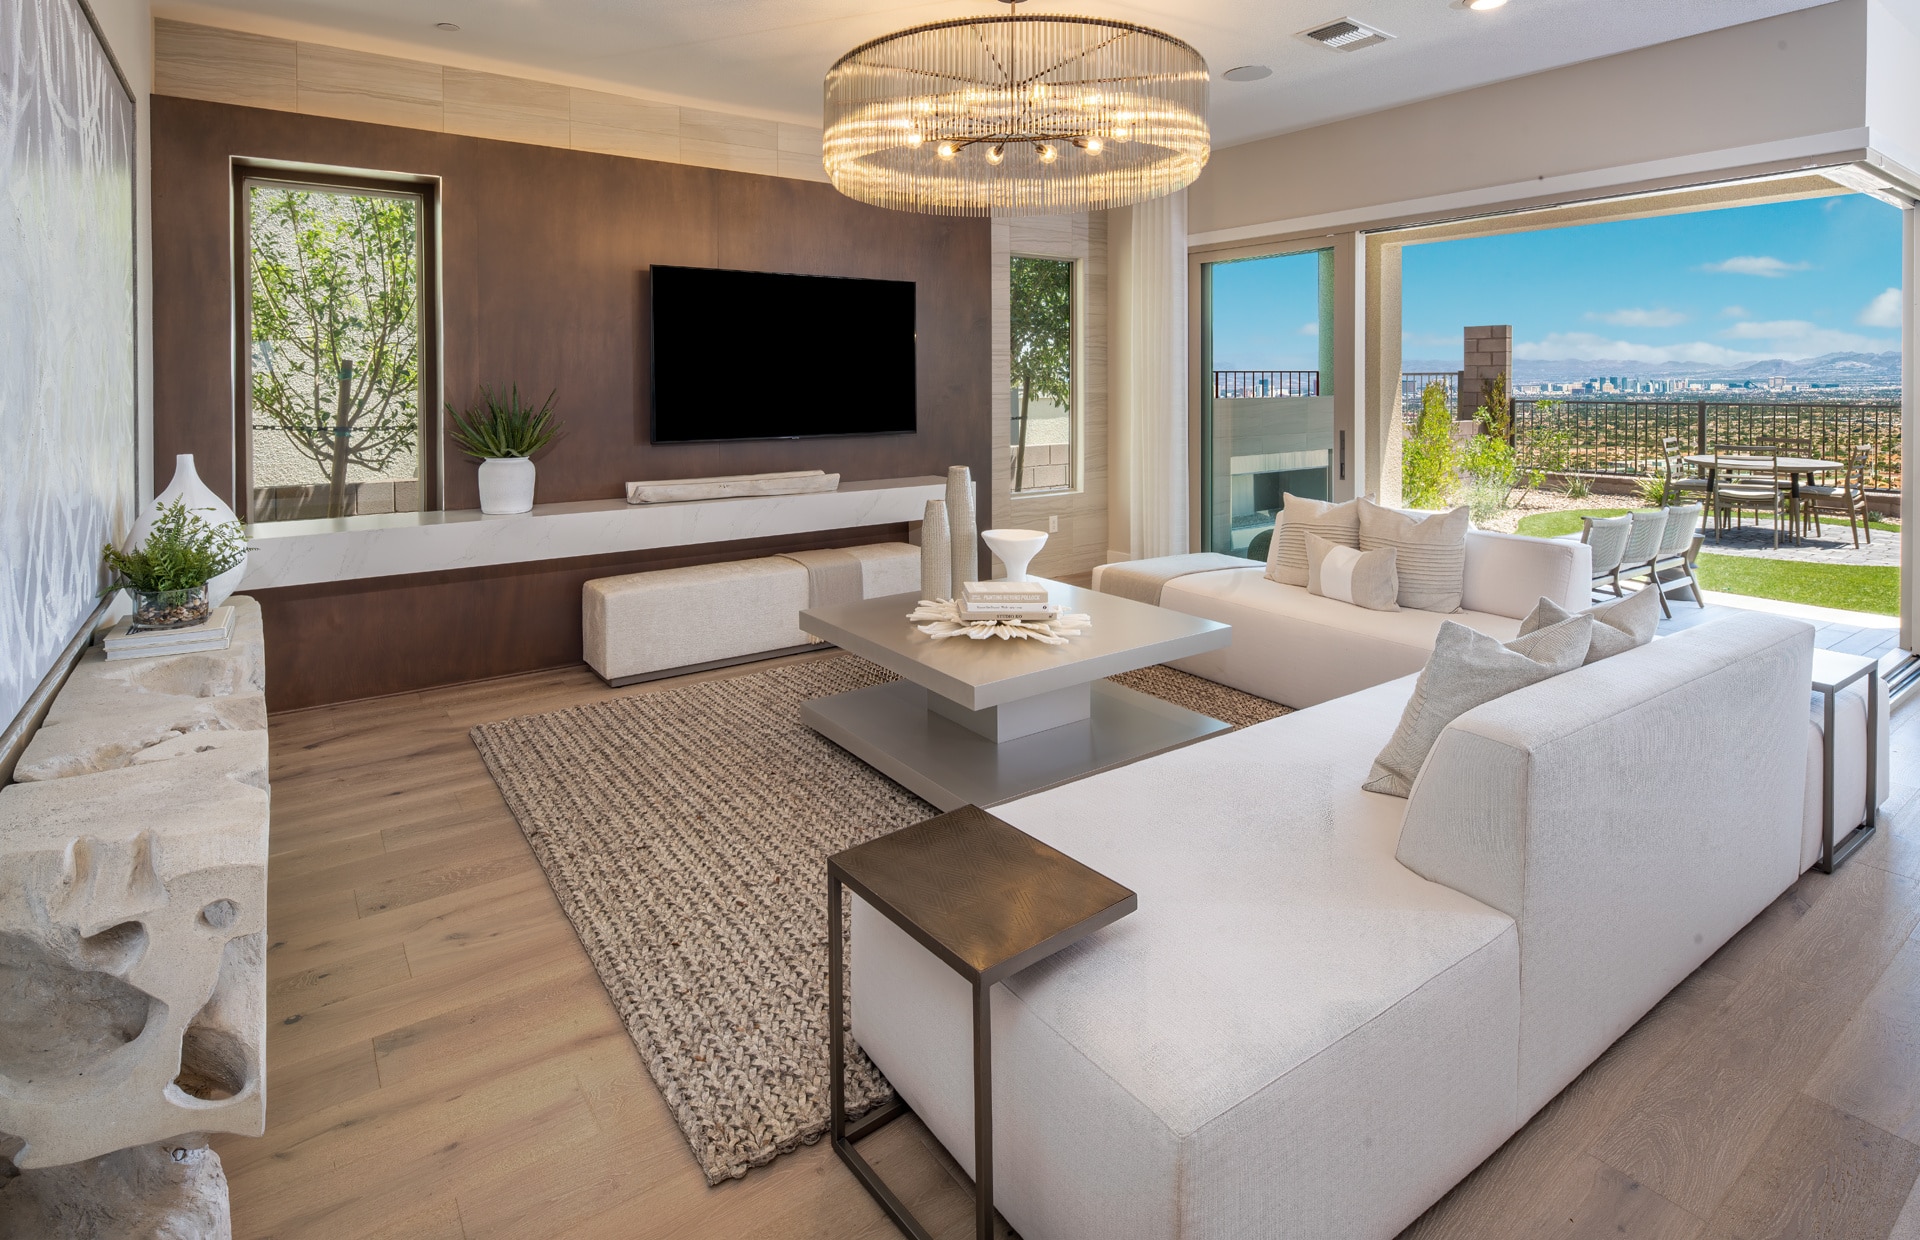 Living Room of Cesena Model at Carmel Cliff by Pulte Homes